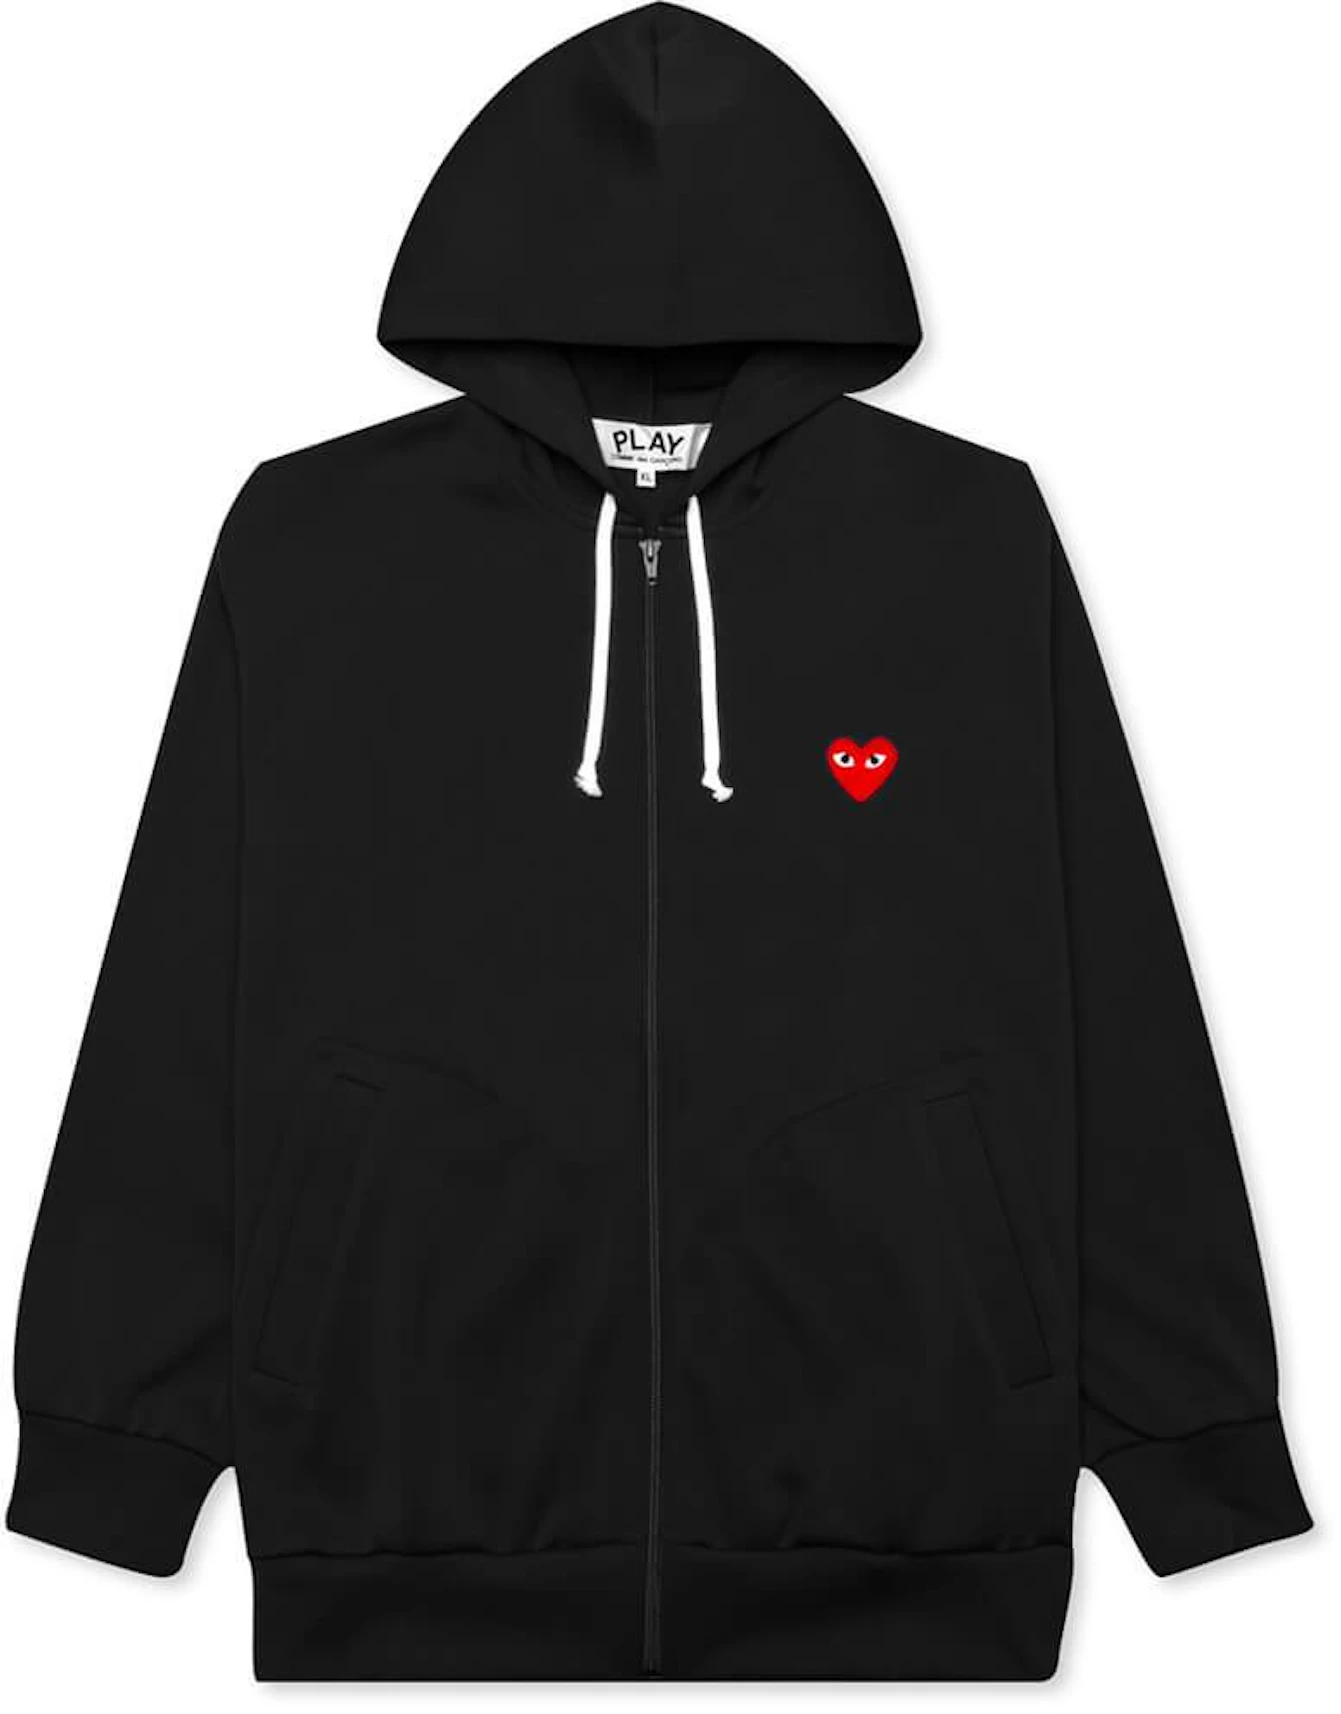 Comme Des Garcons Play Zip | lupon.gov.ph